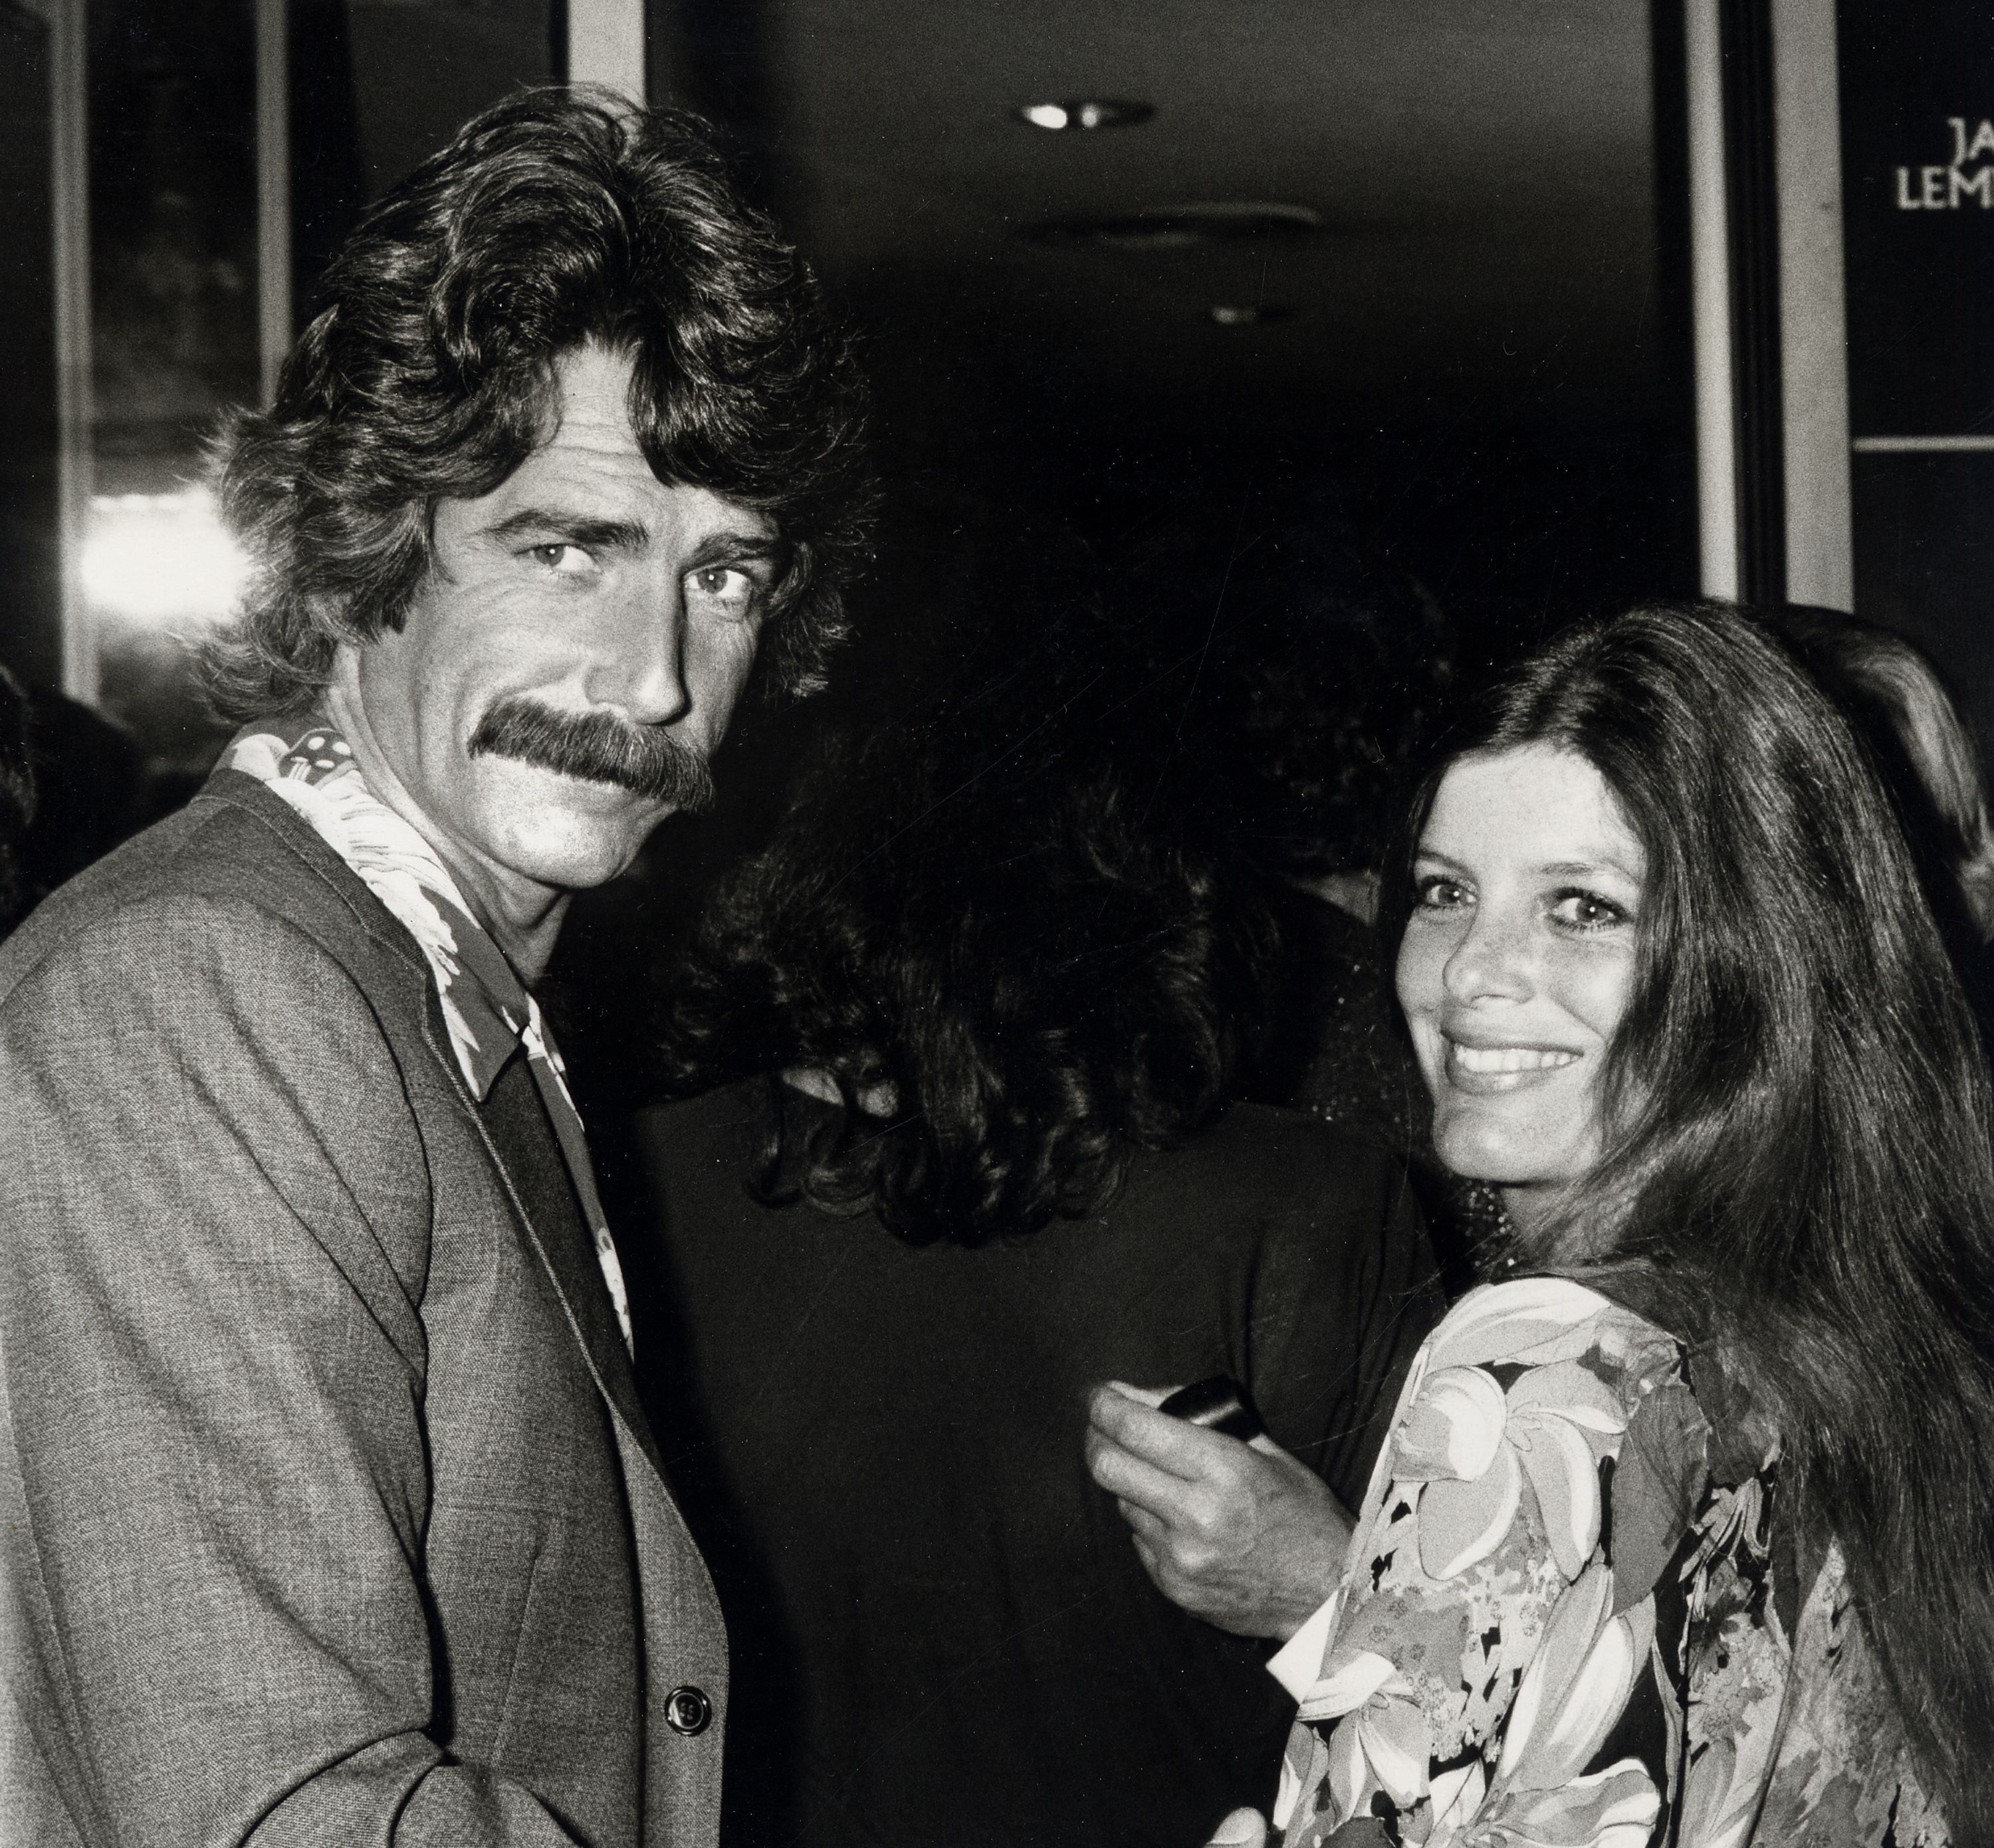 Actor Sam Elliott and actress Katharine Ross attending a film premiere on March 6, 1979 in California. | Source: Getty Images